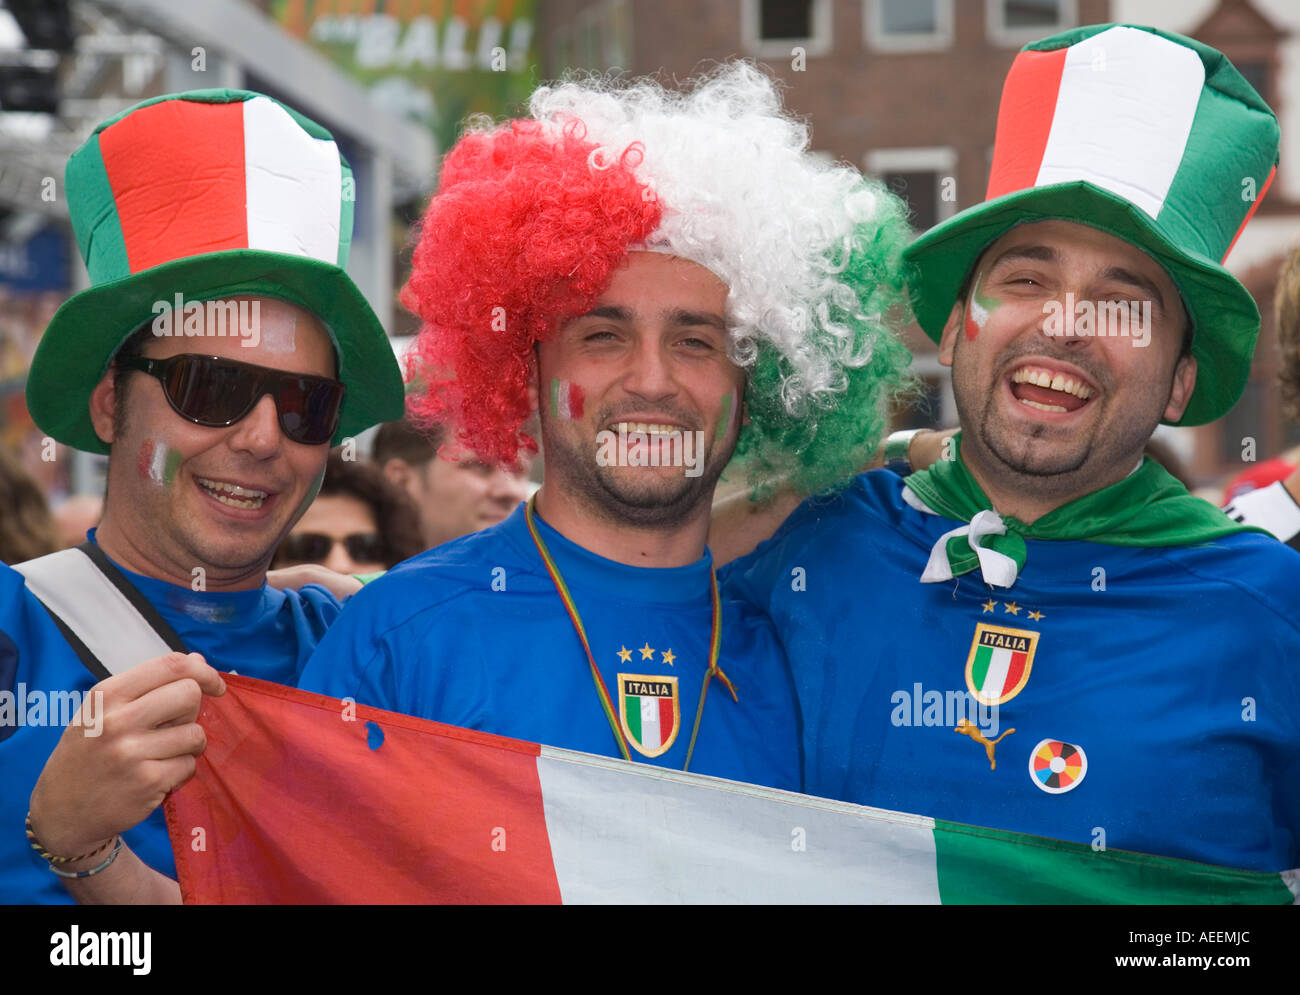 Italian football fans cheering in good mood during the world cup match Italy vs Czech Republic (2:0) at a public viewing event Stock Photo